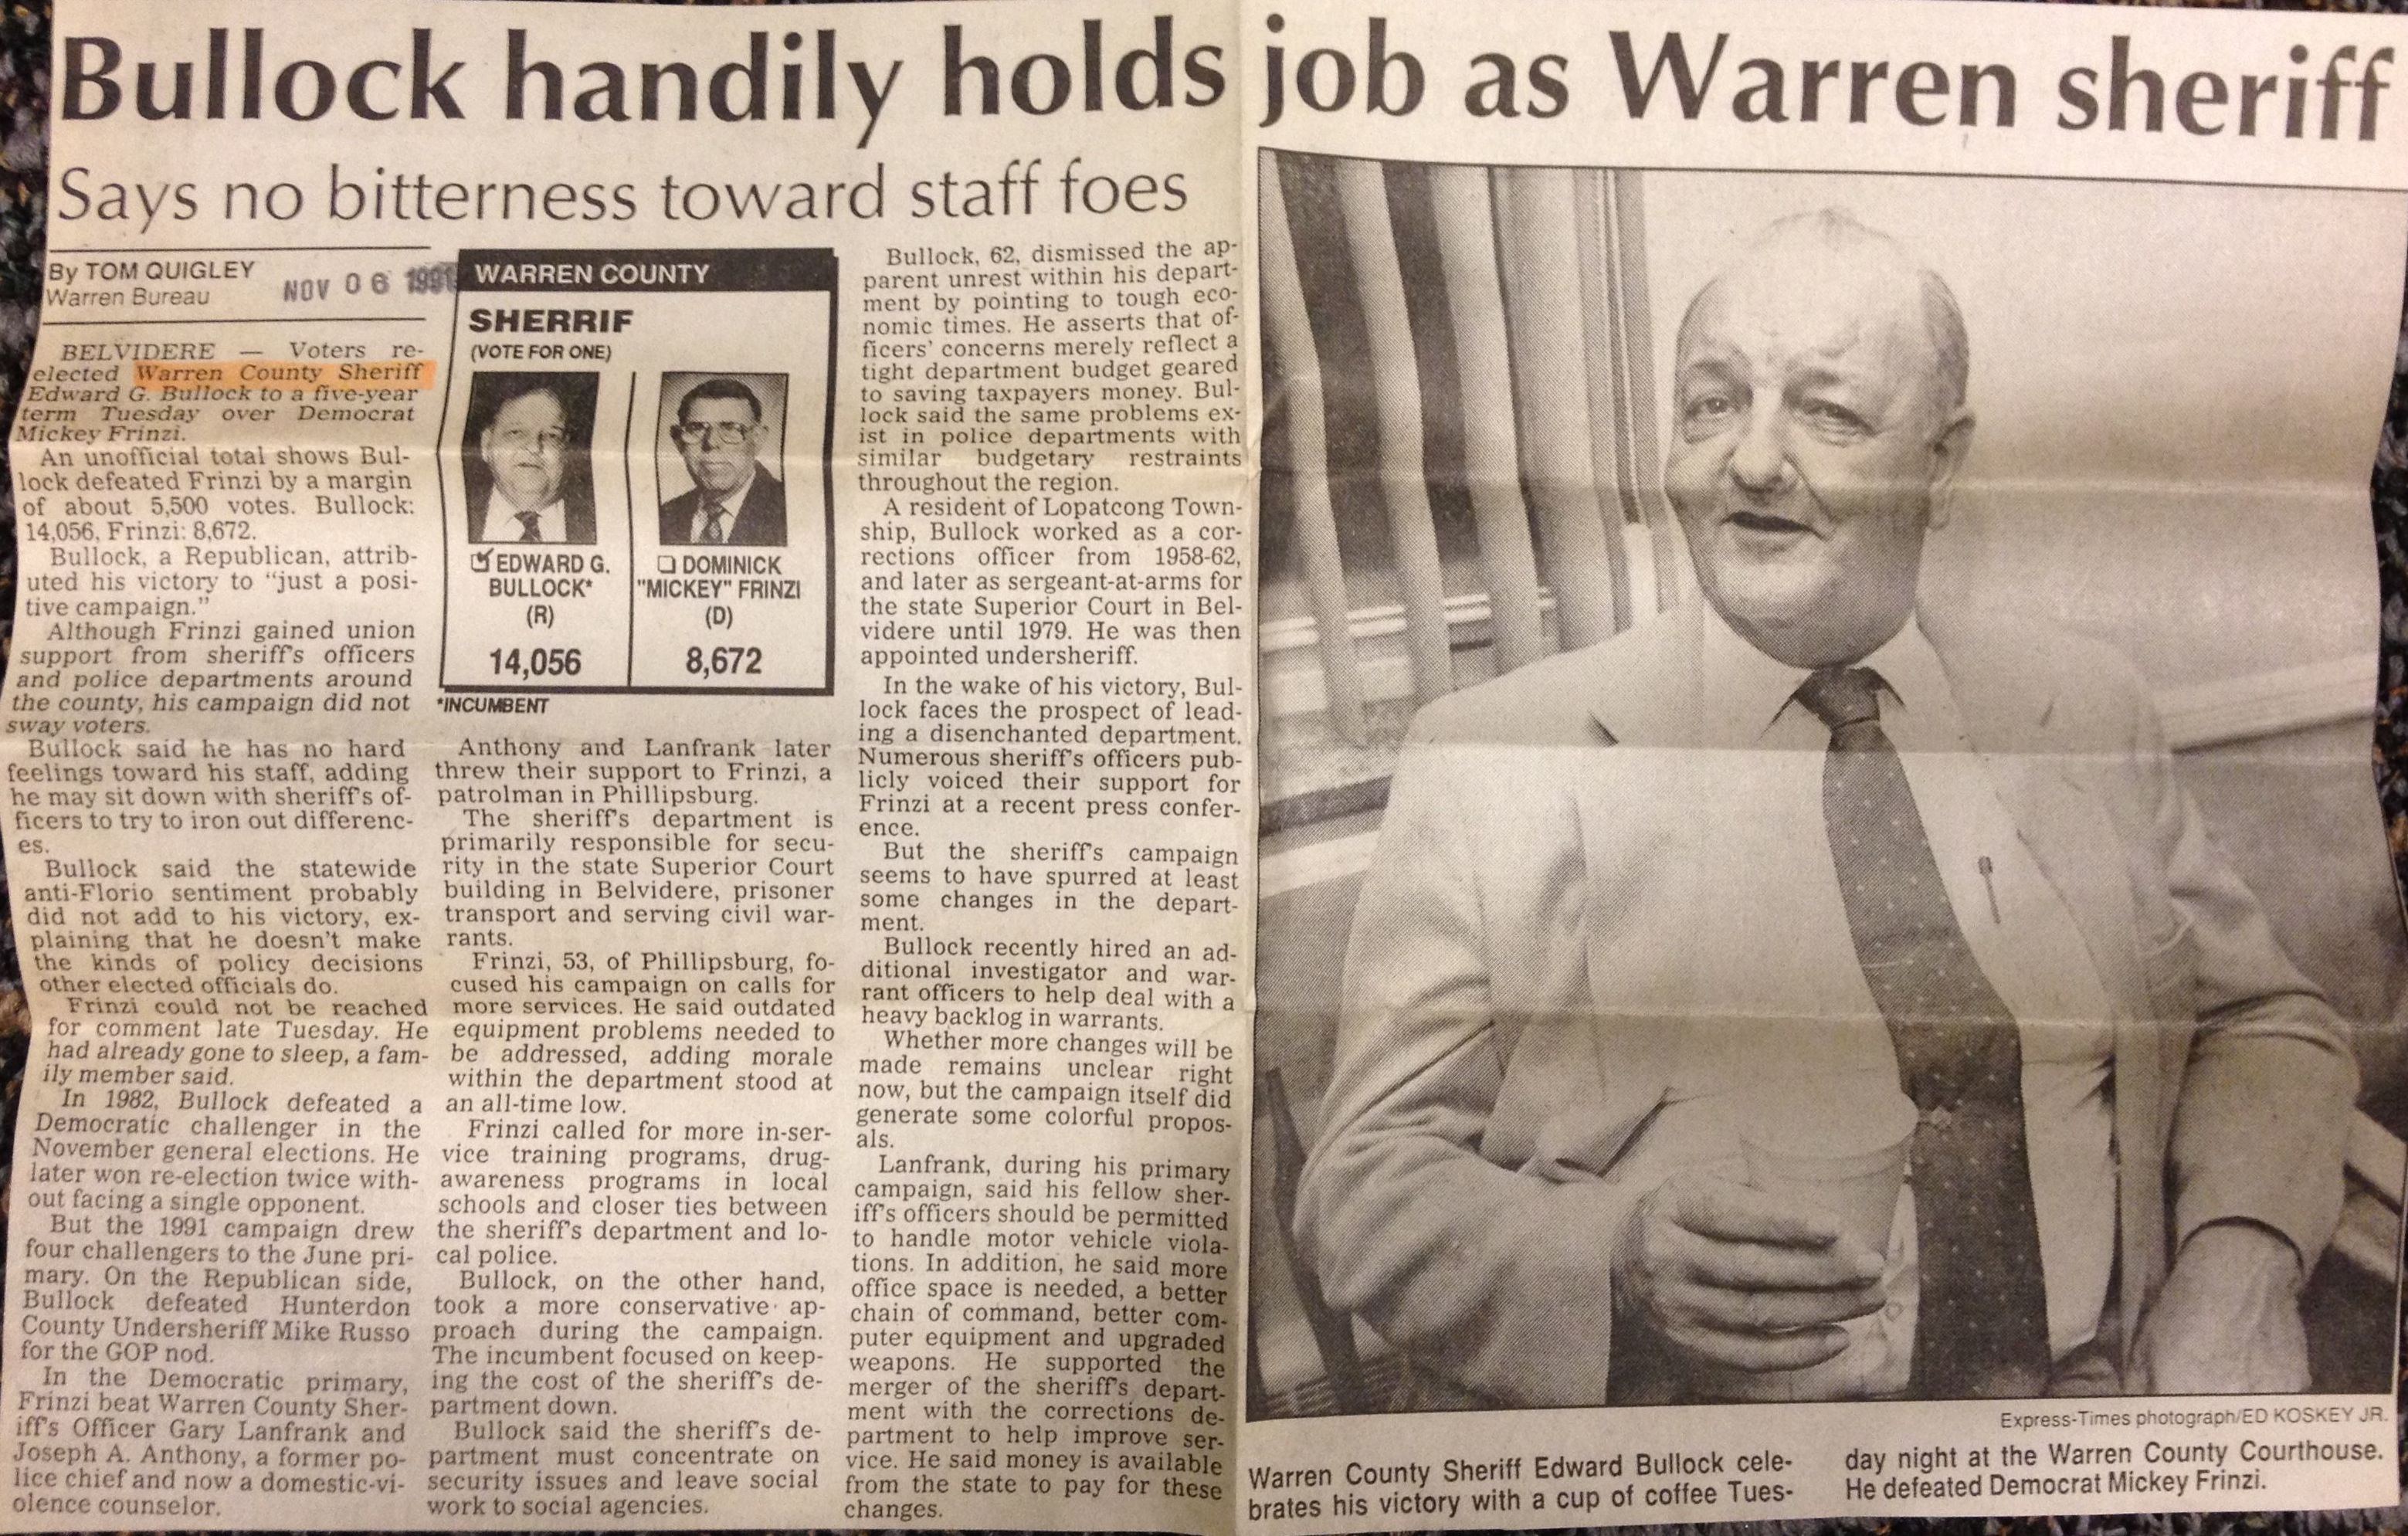 Edward Bullock won his fourth term as Warren County's sheriff in November 1991. He abruptly resigned later that month.